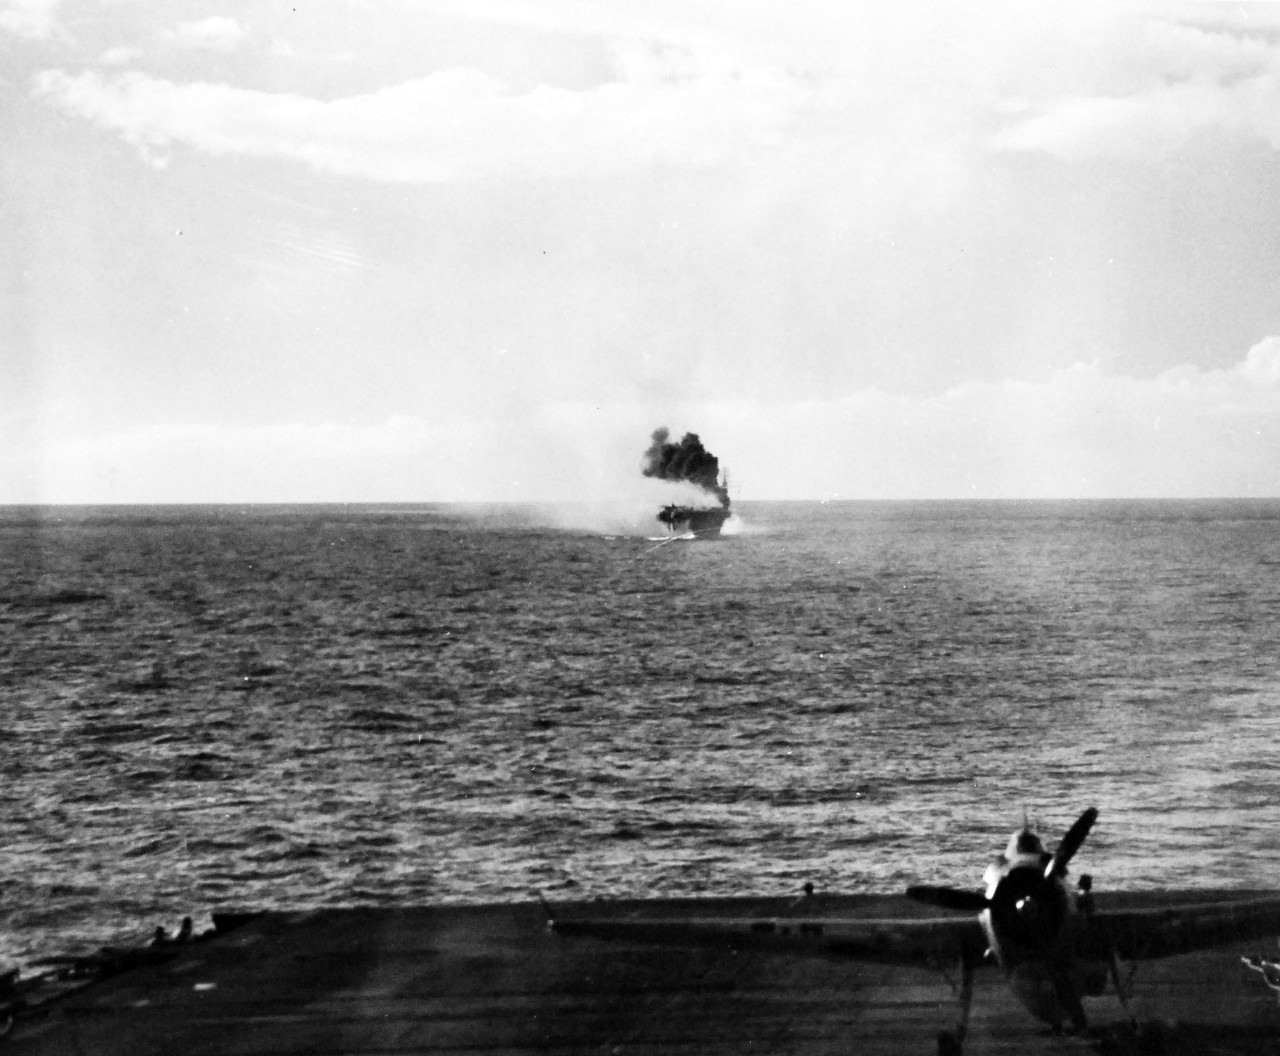 80-G-270626:   USS Suwannee (CVE-27), October 25, 1944.  Fires and explosion on USS Suwannee (CVE-27) resulting from a suicide hit of a Japanese “Zero” near Leyte Gulf, Philippines, taken from USS Sangamon (CVE-25).  Official U.S. Navy photograph, now in the collections of the National Archives.  